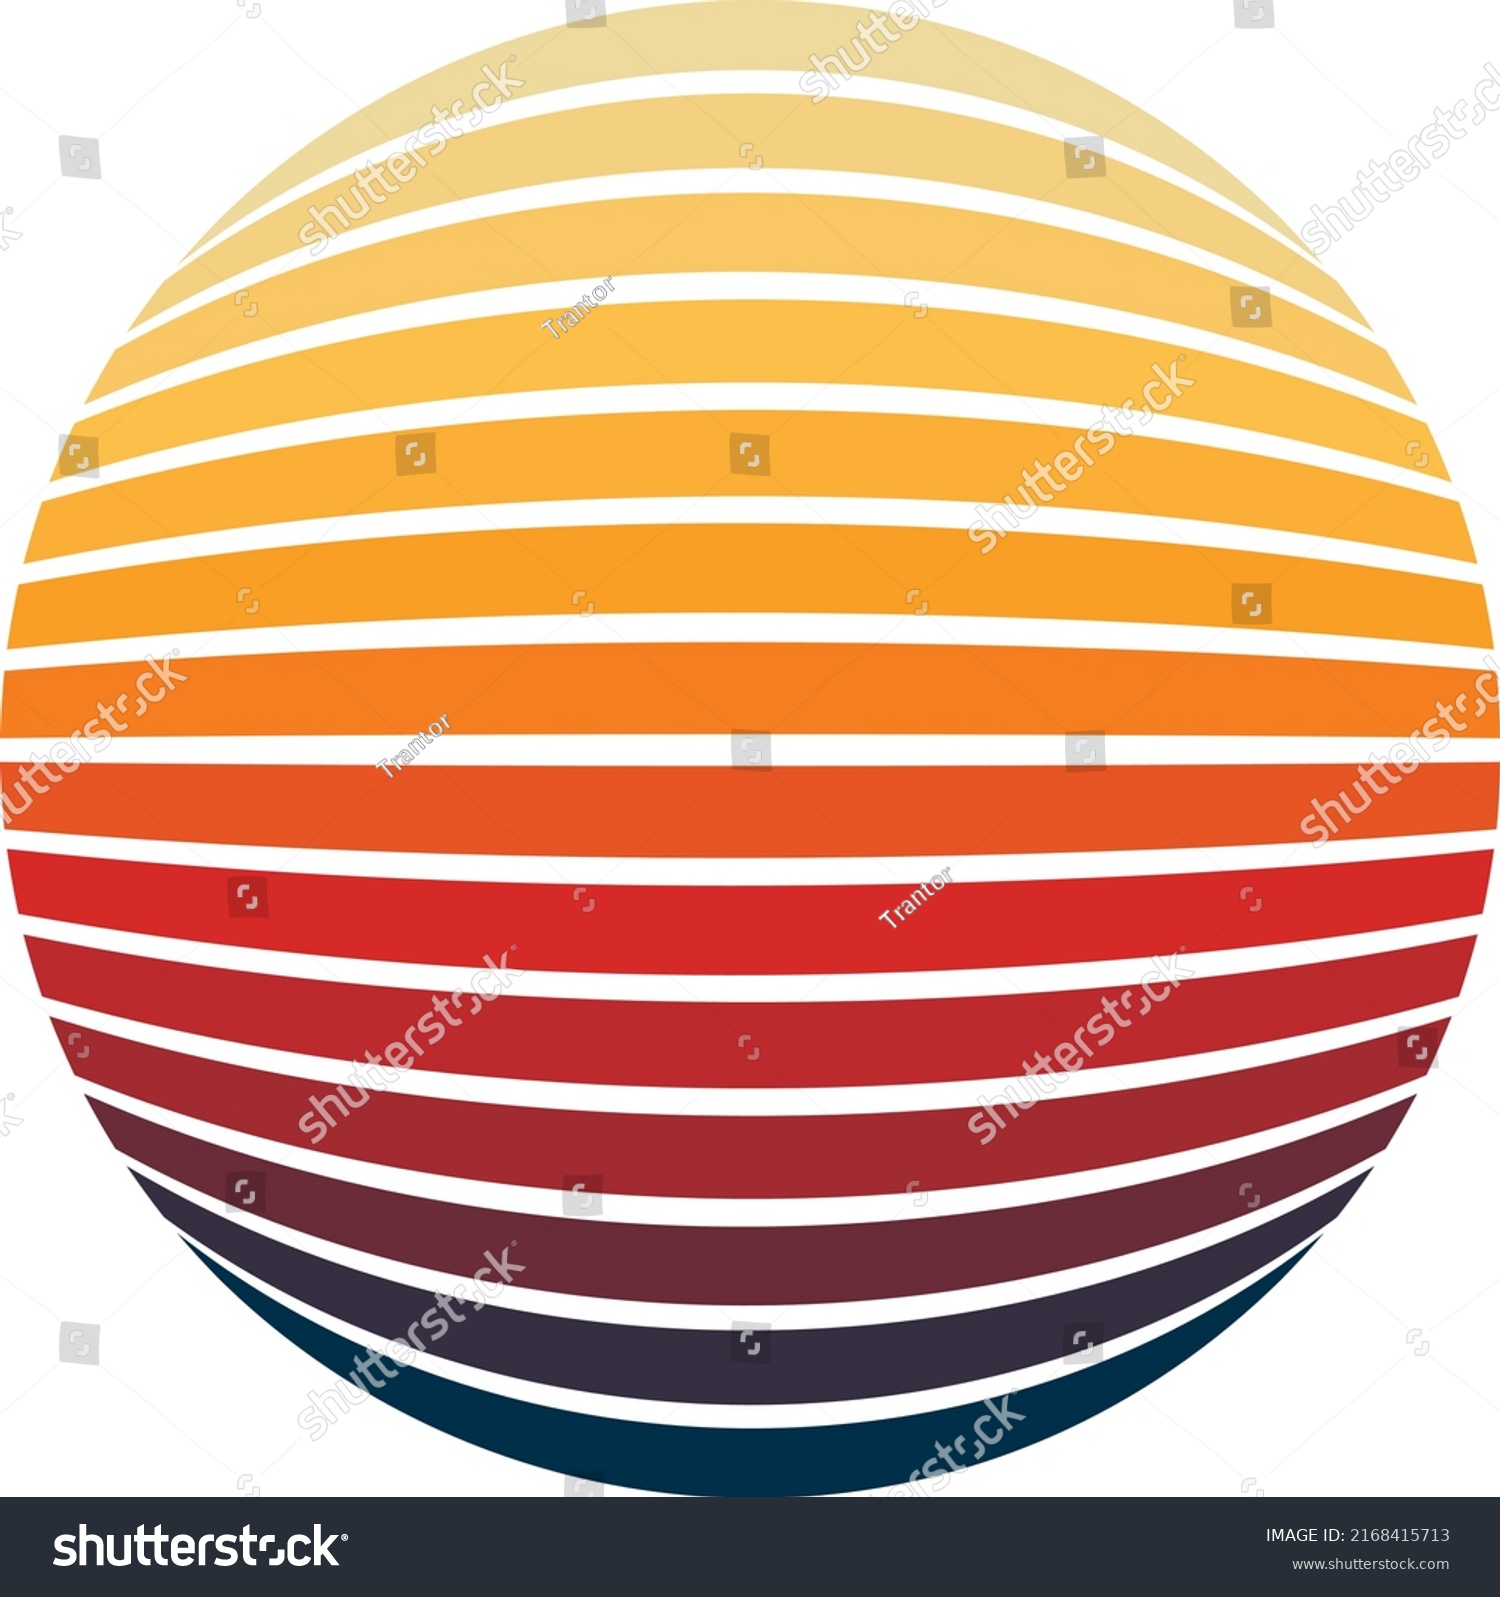 SVG of Retro sunset striped vintage design on white background. This vintage striped retro sunset is for t-shirt design, print on demand, book covers, posters, banners, etc. svg